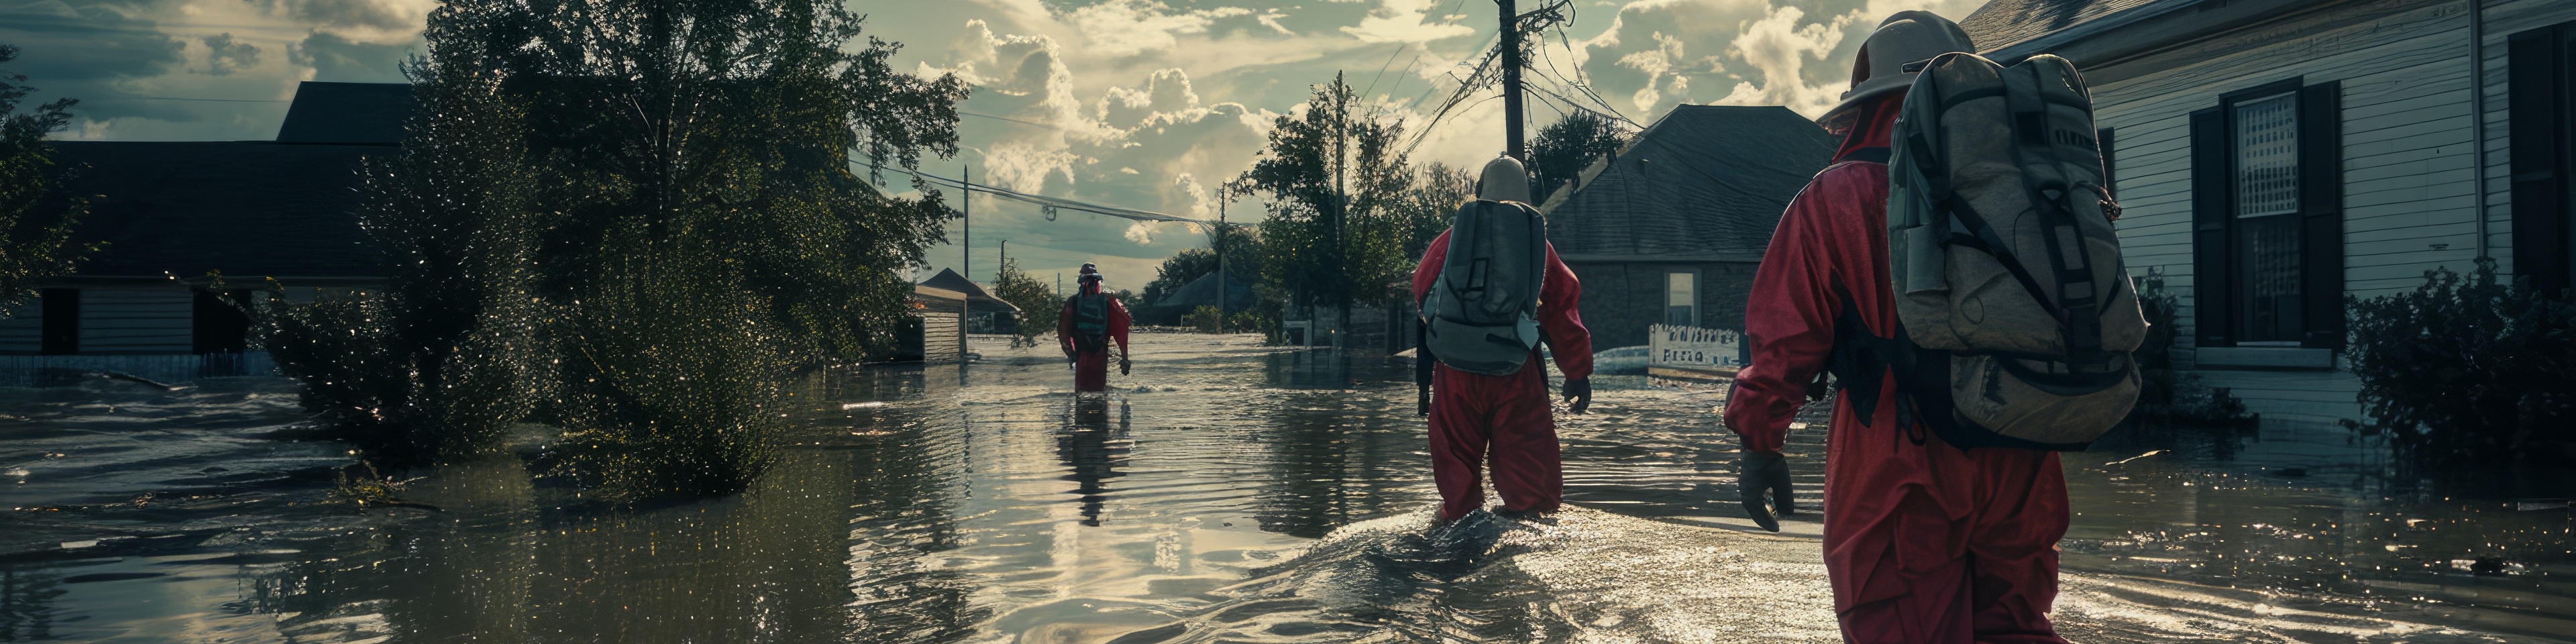 A disaster response team walks through floodwaters in a residential area